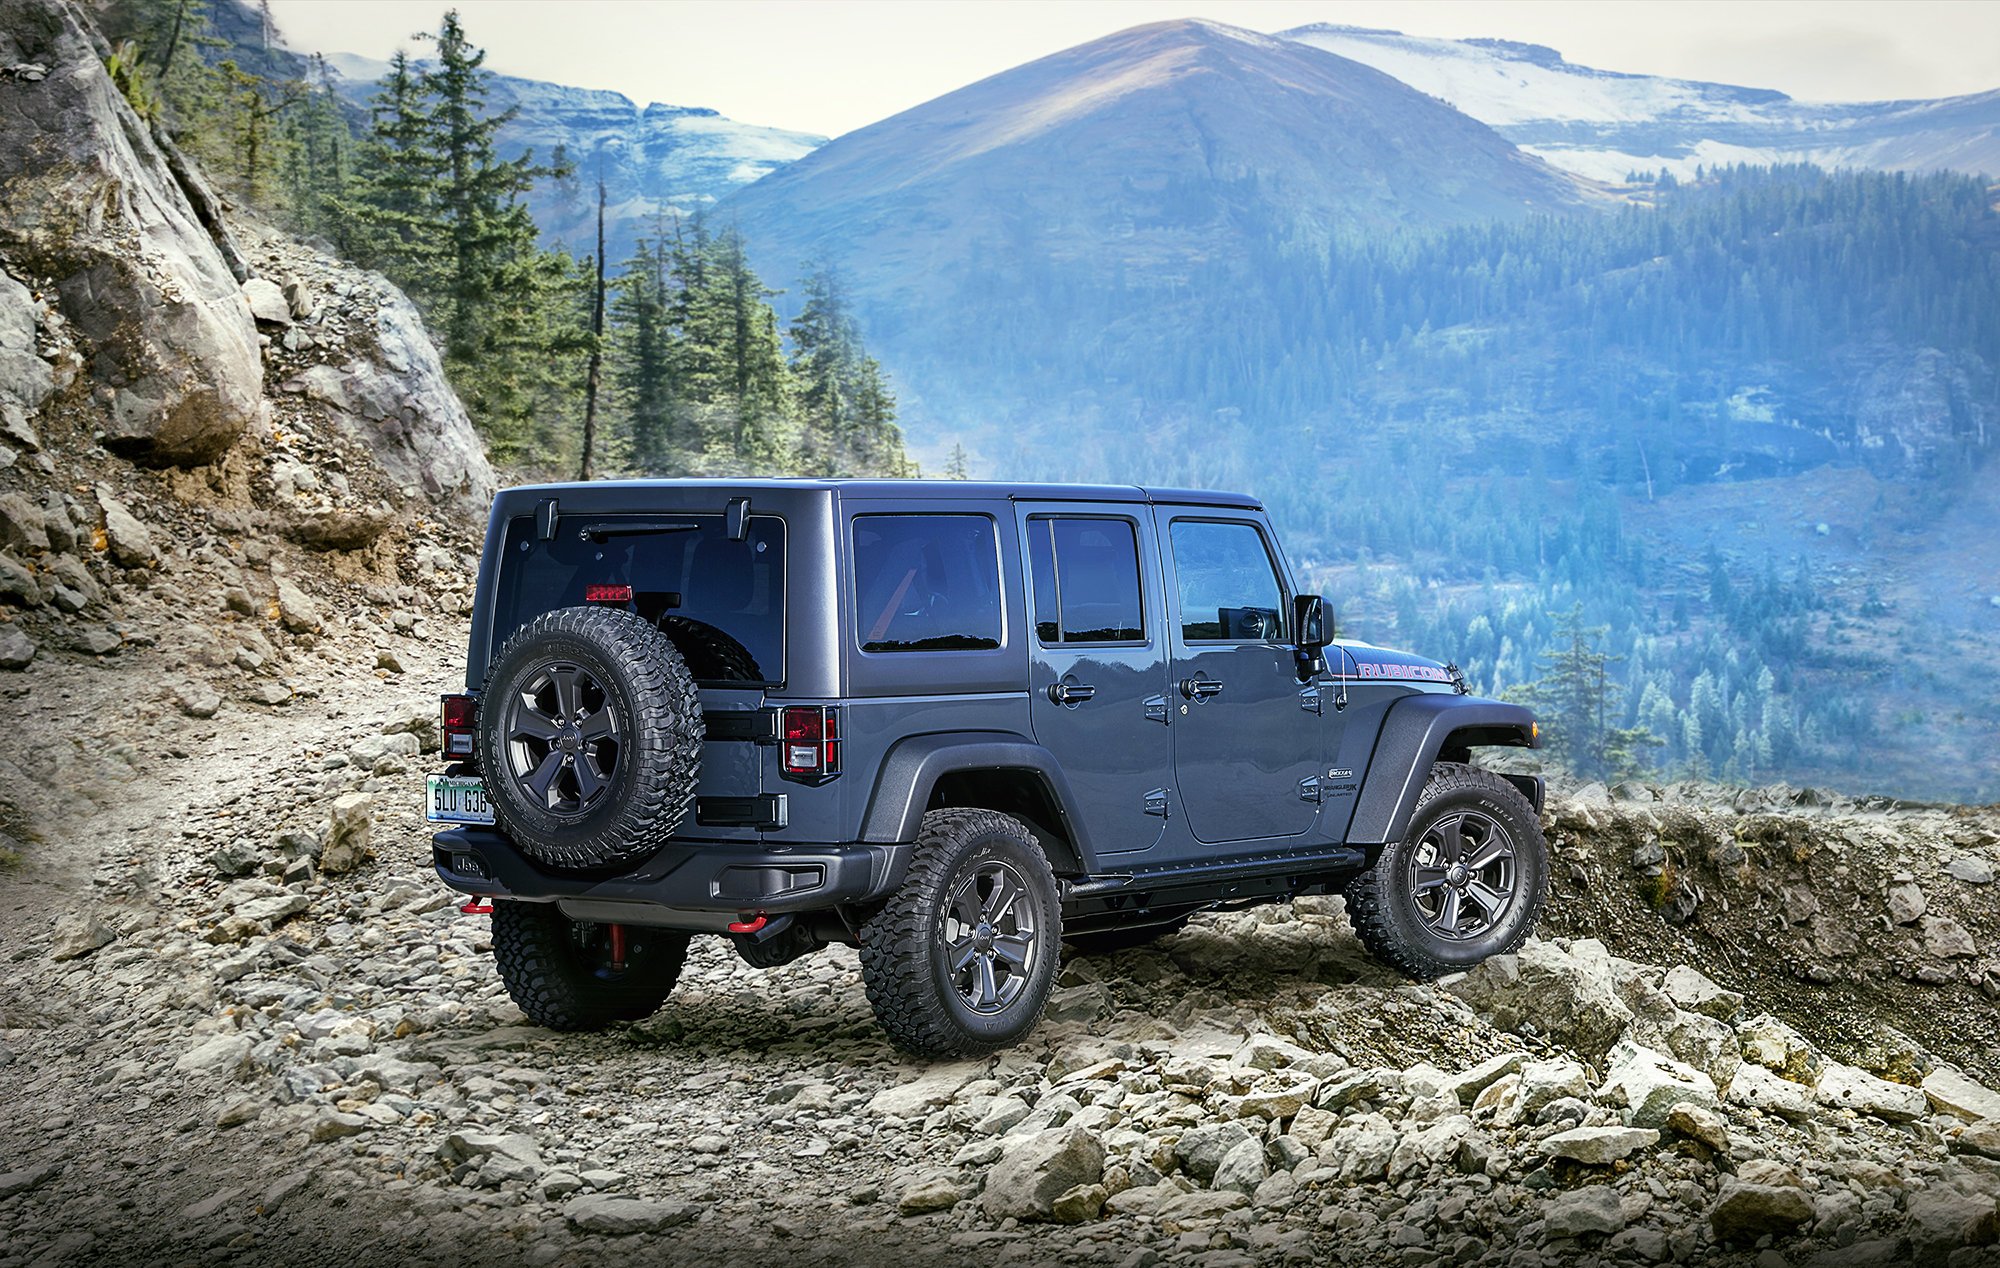 JK Or JL - How To Make Sure You Order The Wrangler You Want | Quadratec